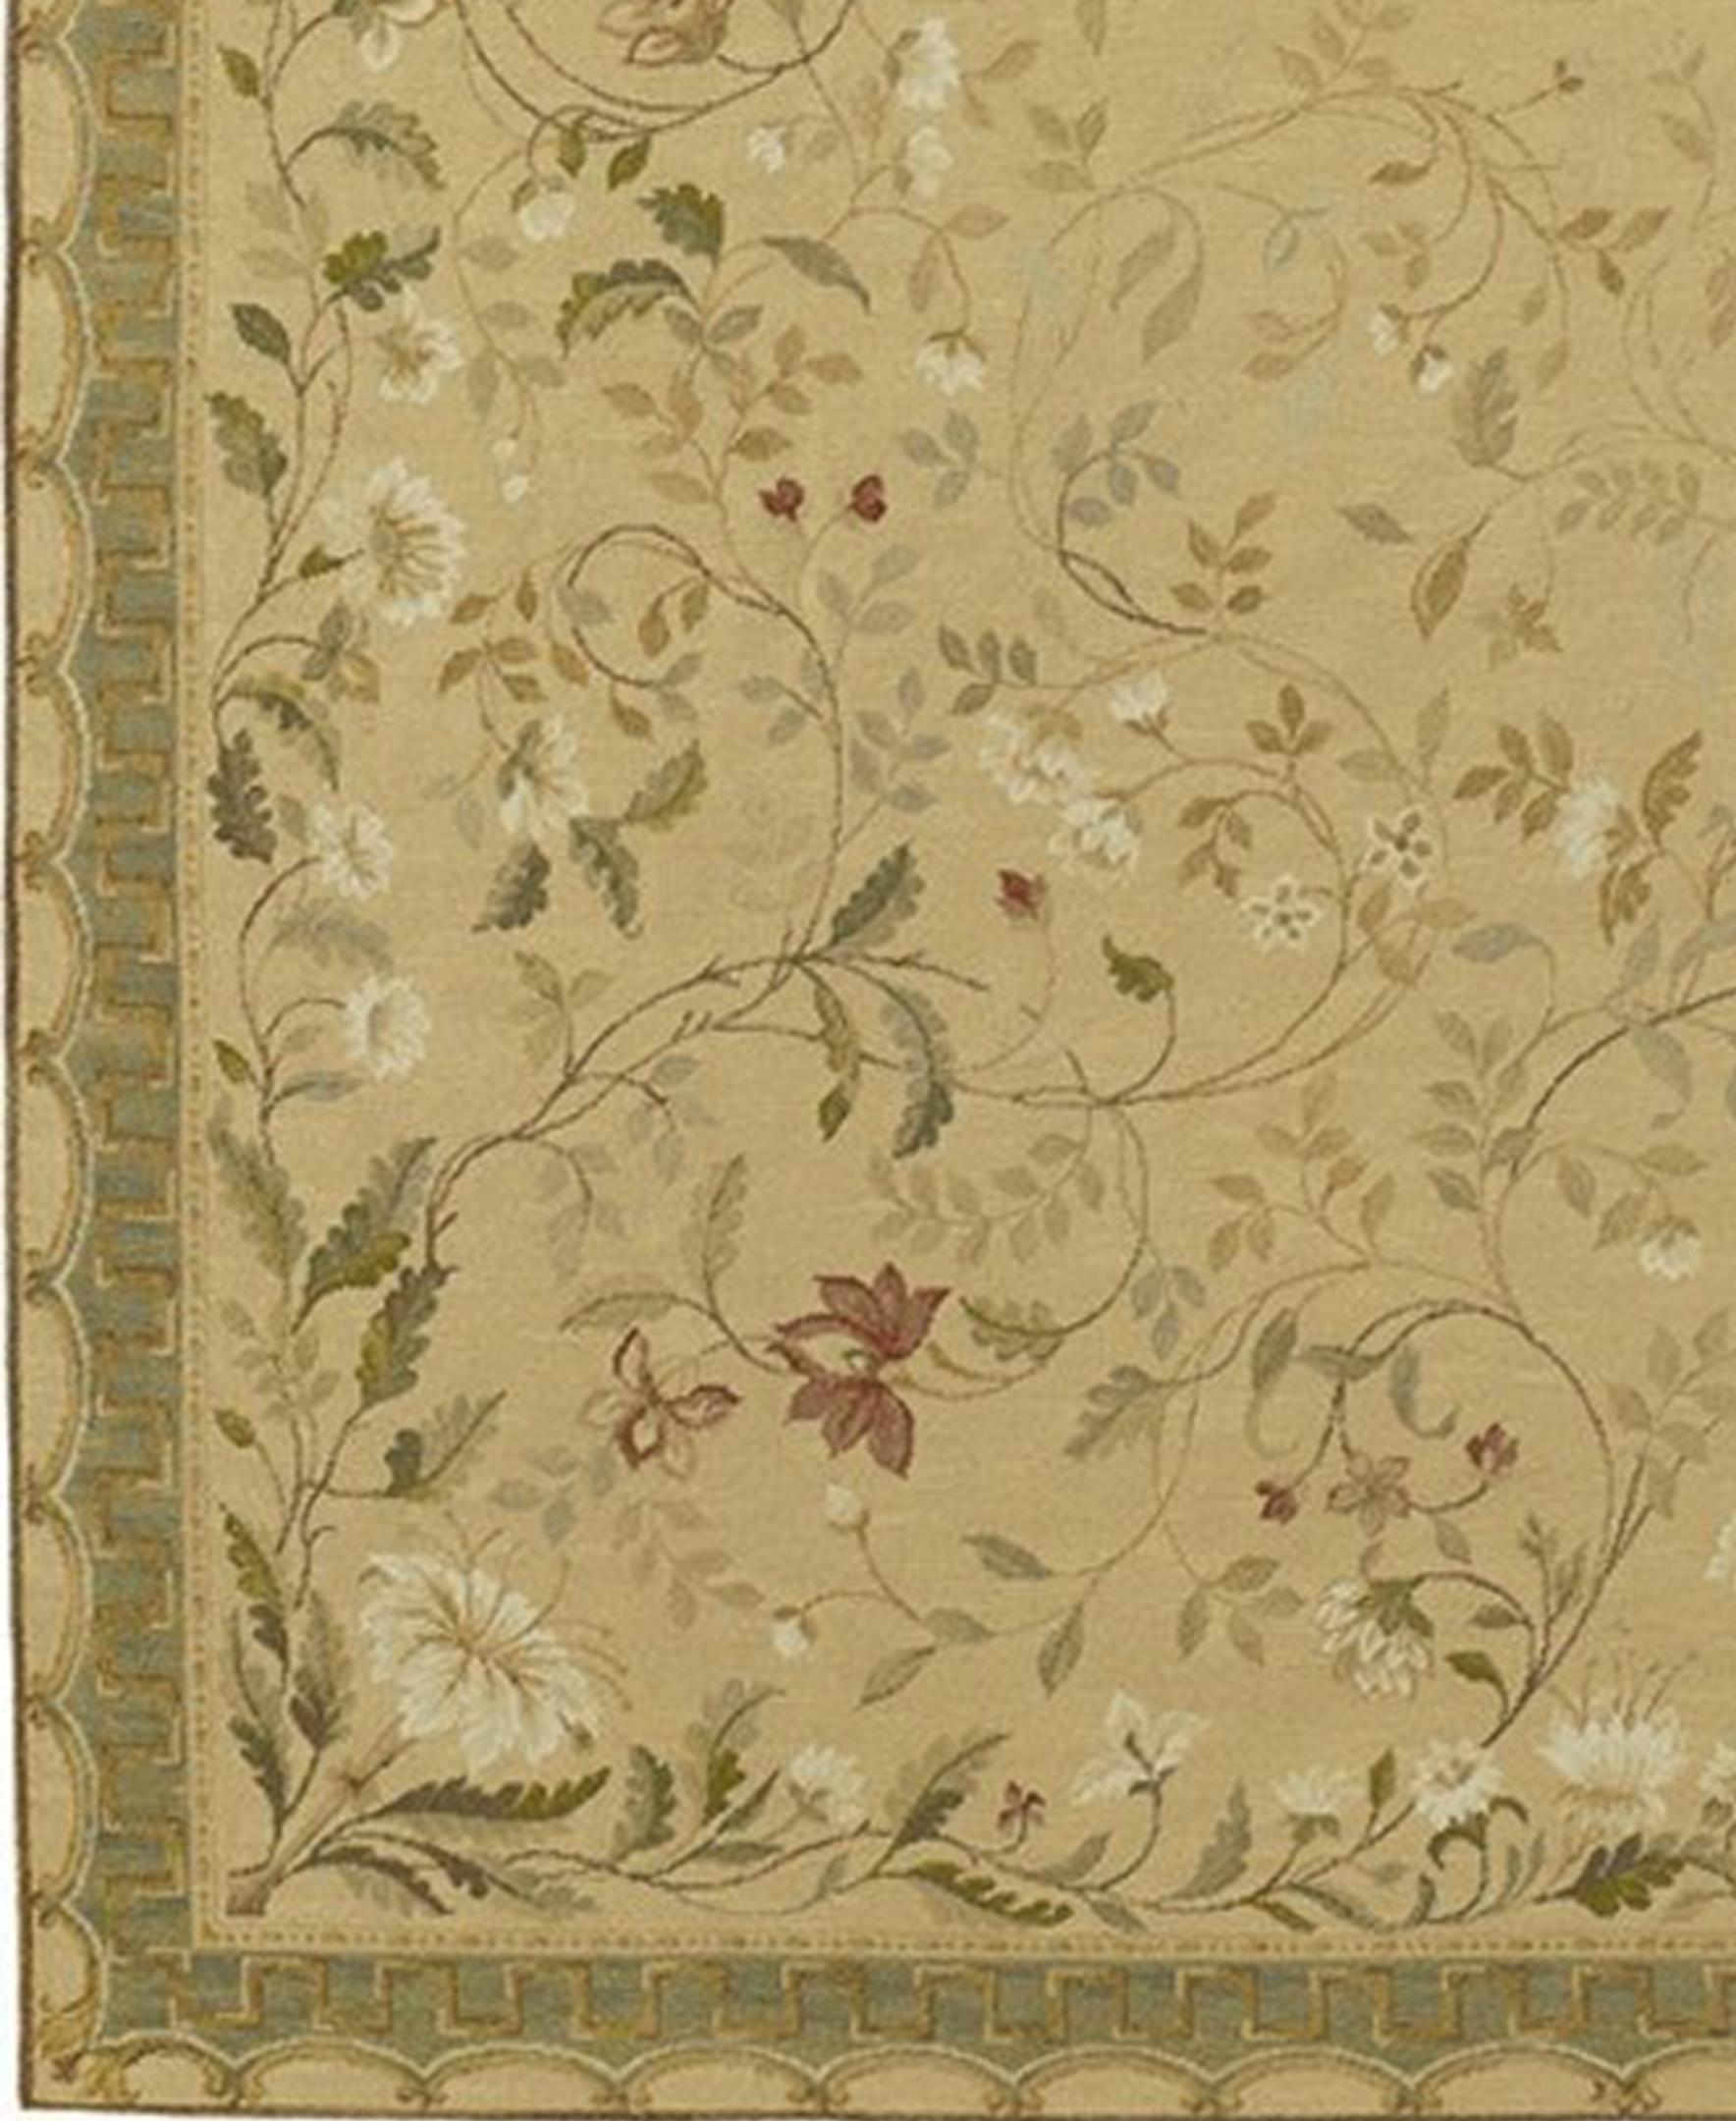 Pomegranate red and white flowers with sage and teal green leaves and tone on tone curving vines trail toward the center of a gold background with fresco like shading. The teal and gold border is a reminiscent of a chinoiserie canopy. Using ancient